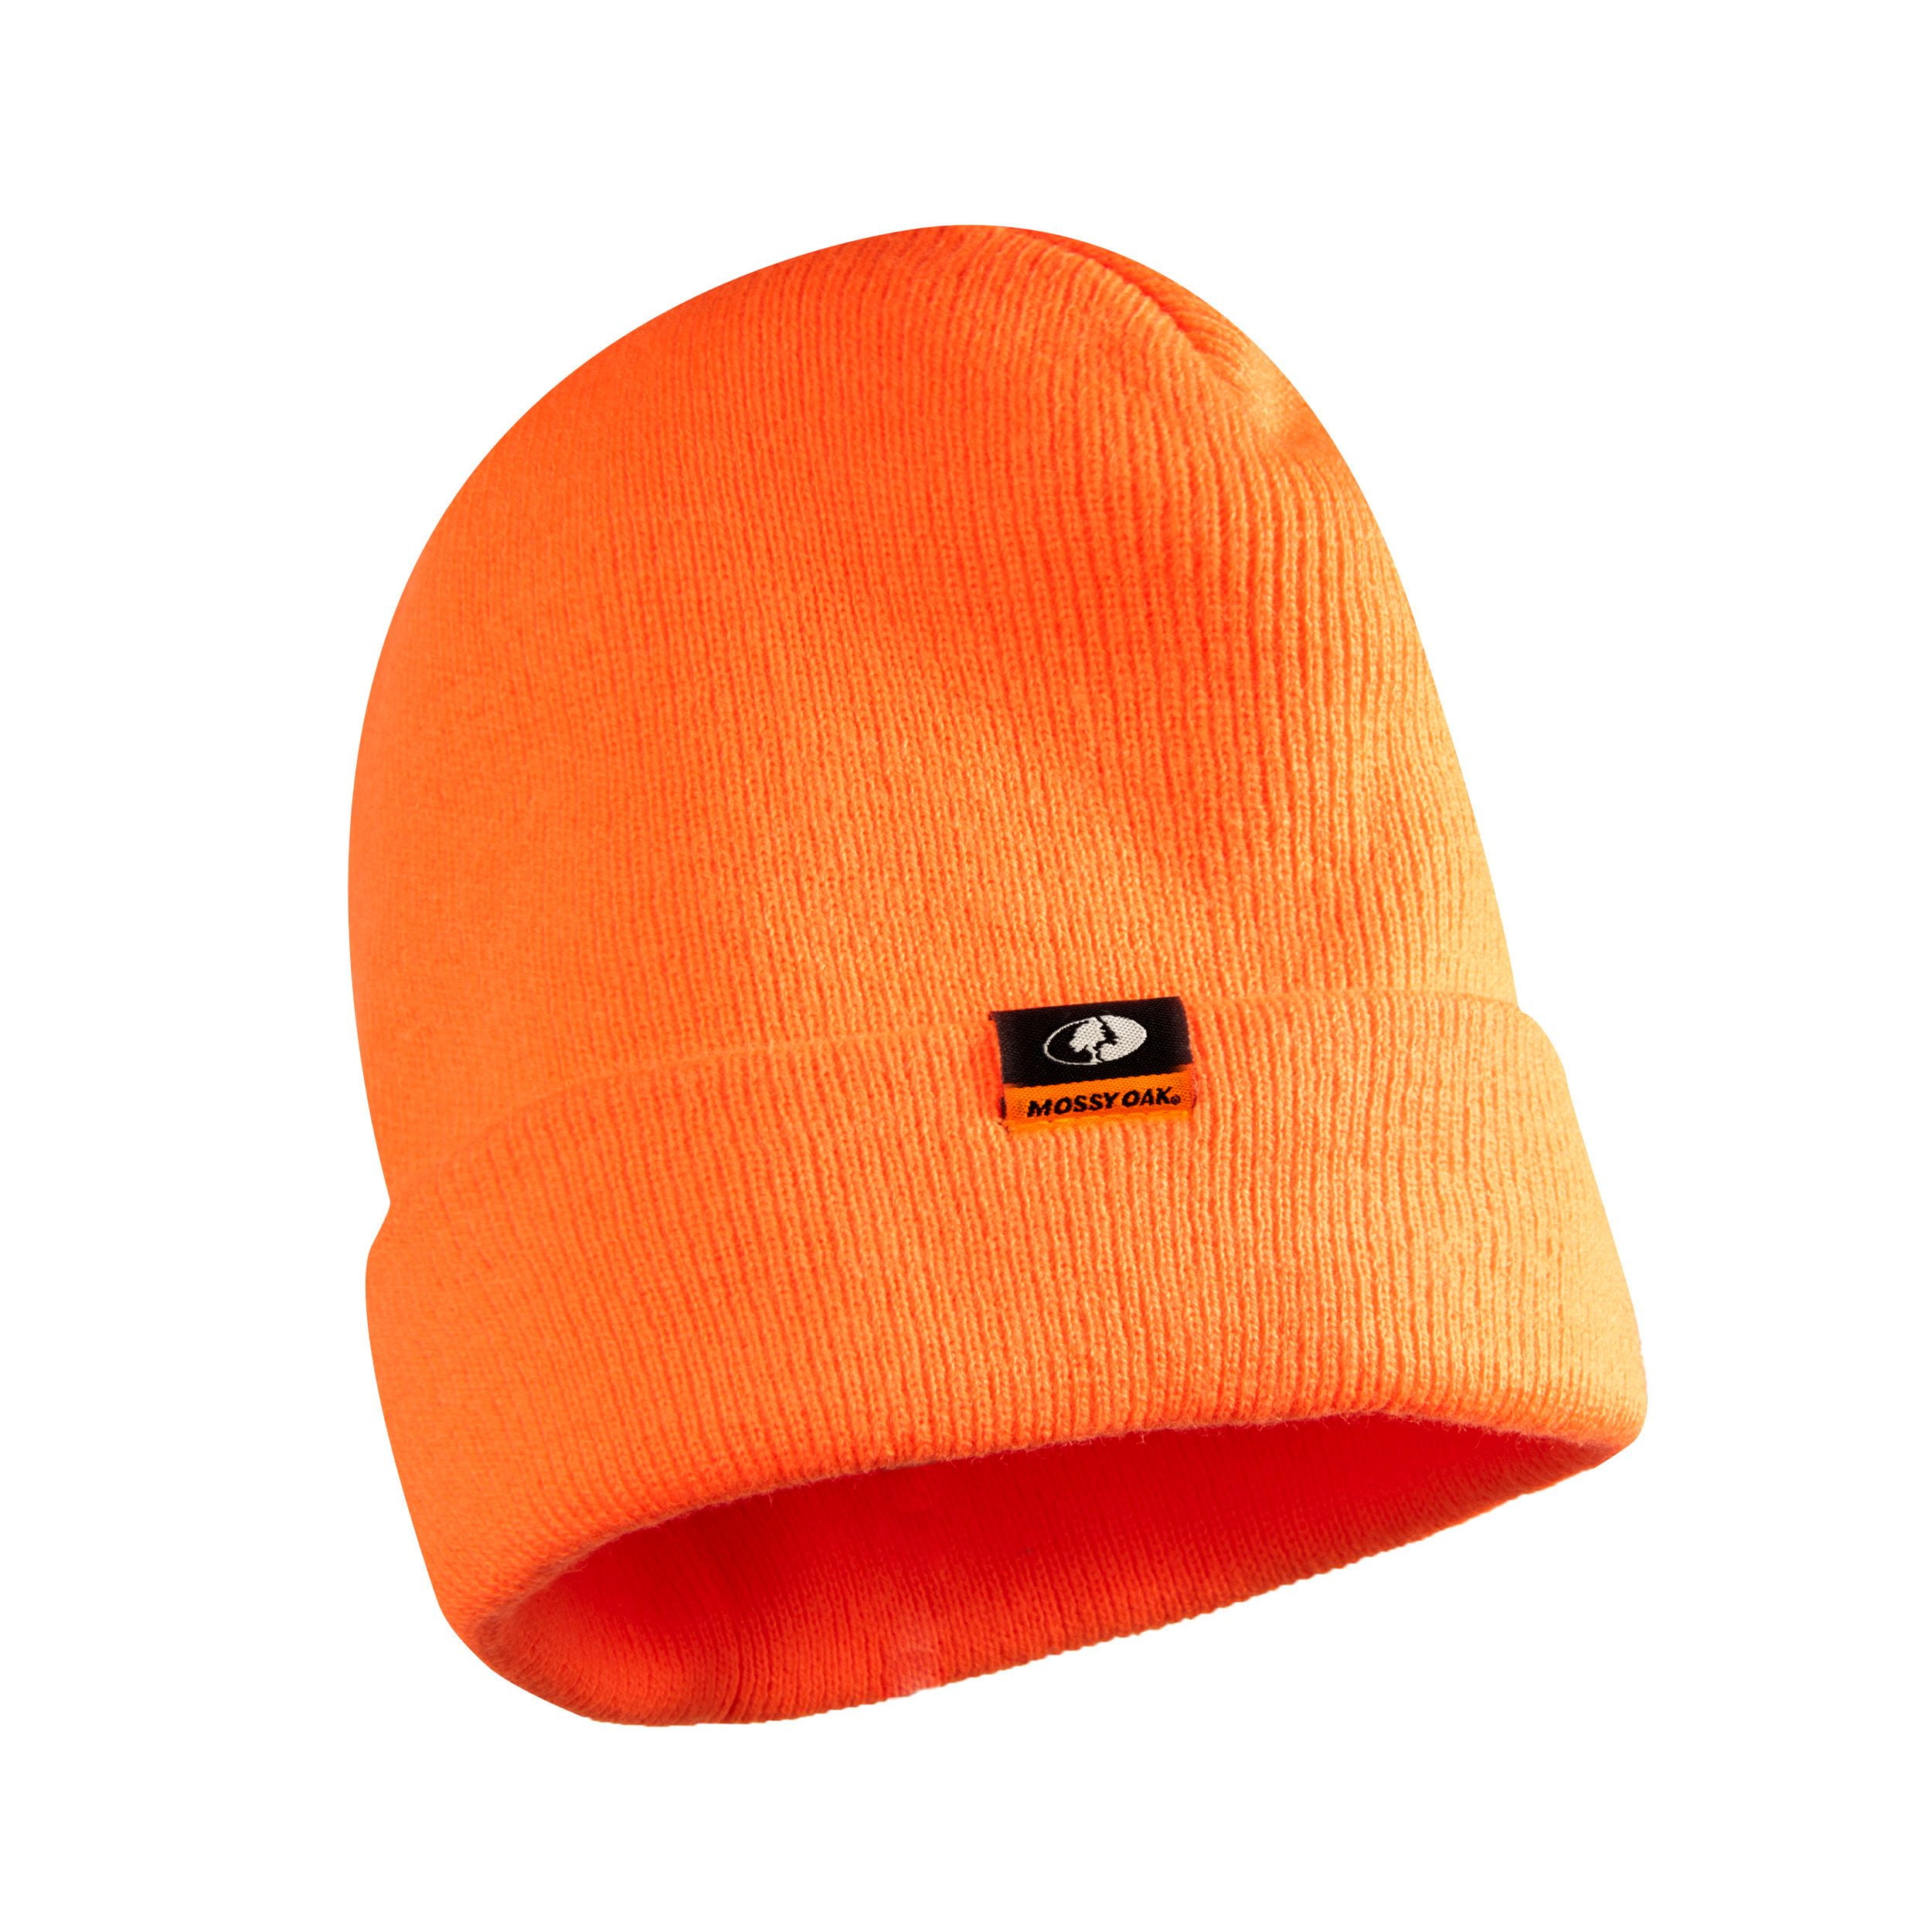 Mossy Oak Blaze Orange Insulated Hunting Beanie Hat, One Size Fits Most, Adult